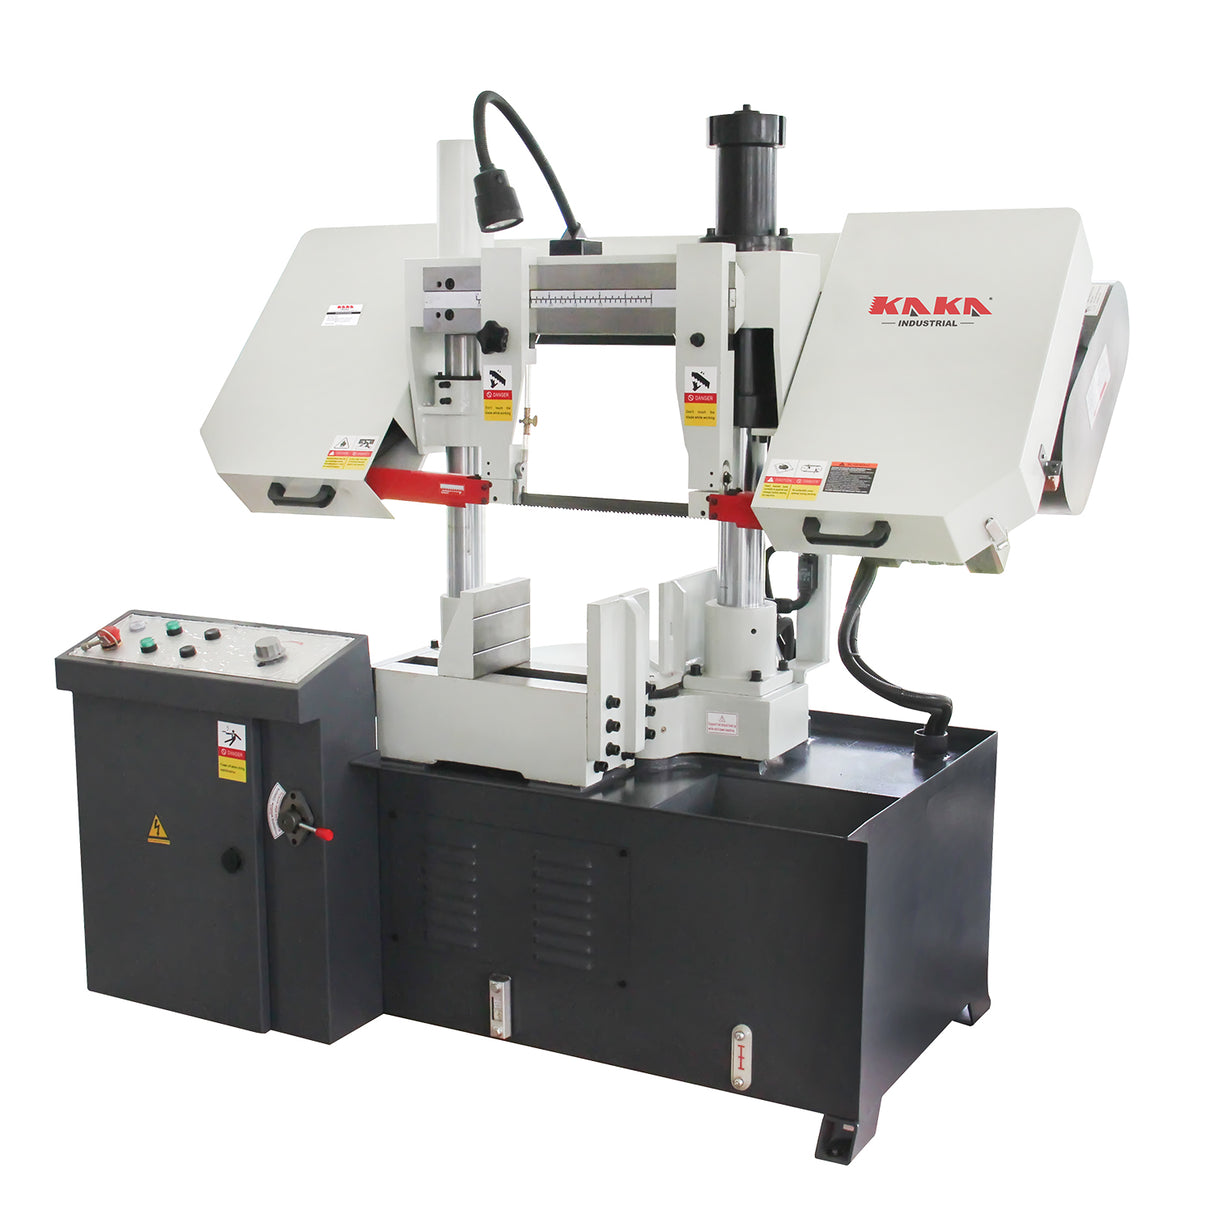 KANG Industrial TBK-11A Double Column Band Saw, Swivel Head Saw Machine, 280mm Round Bar Cutting Capacity